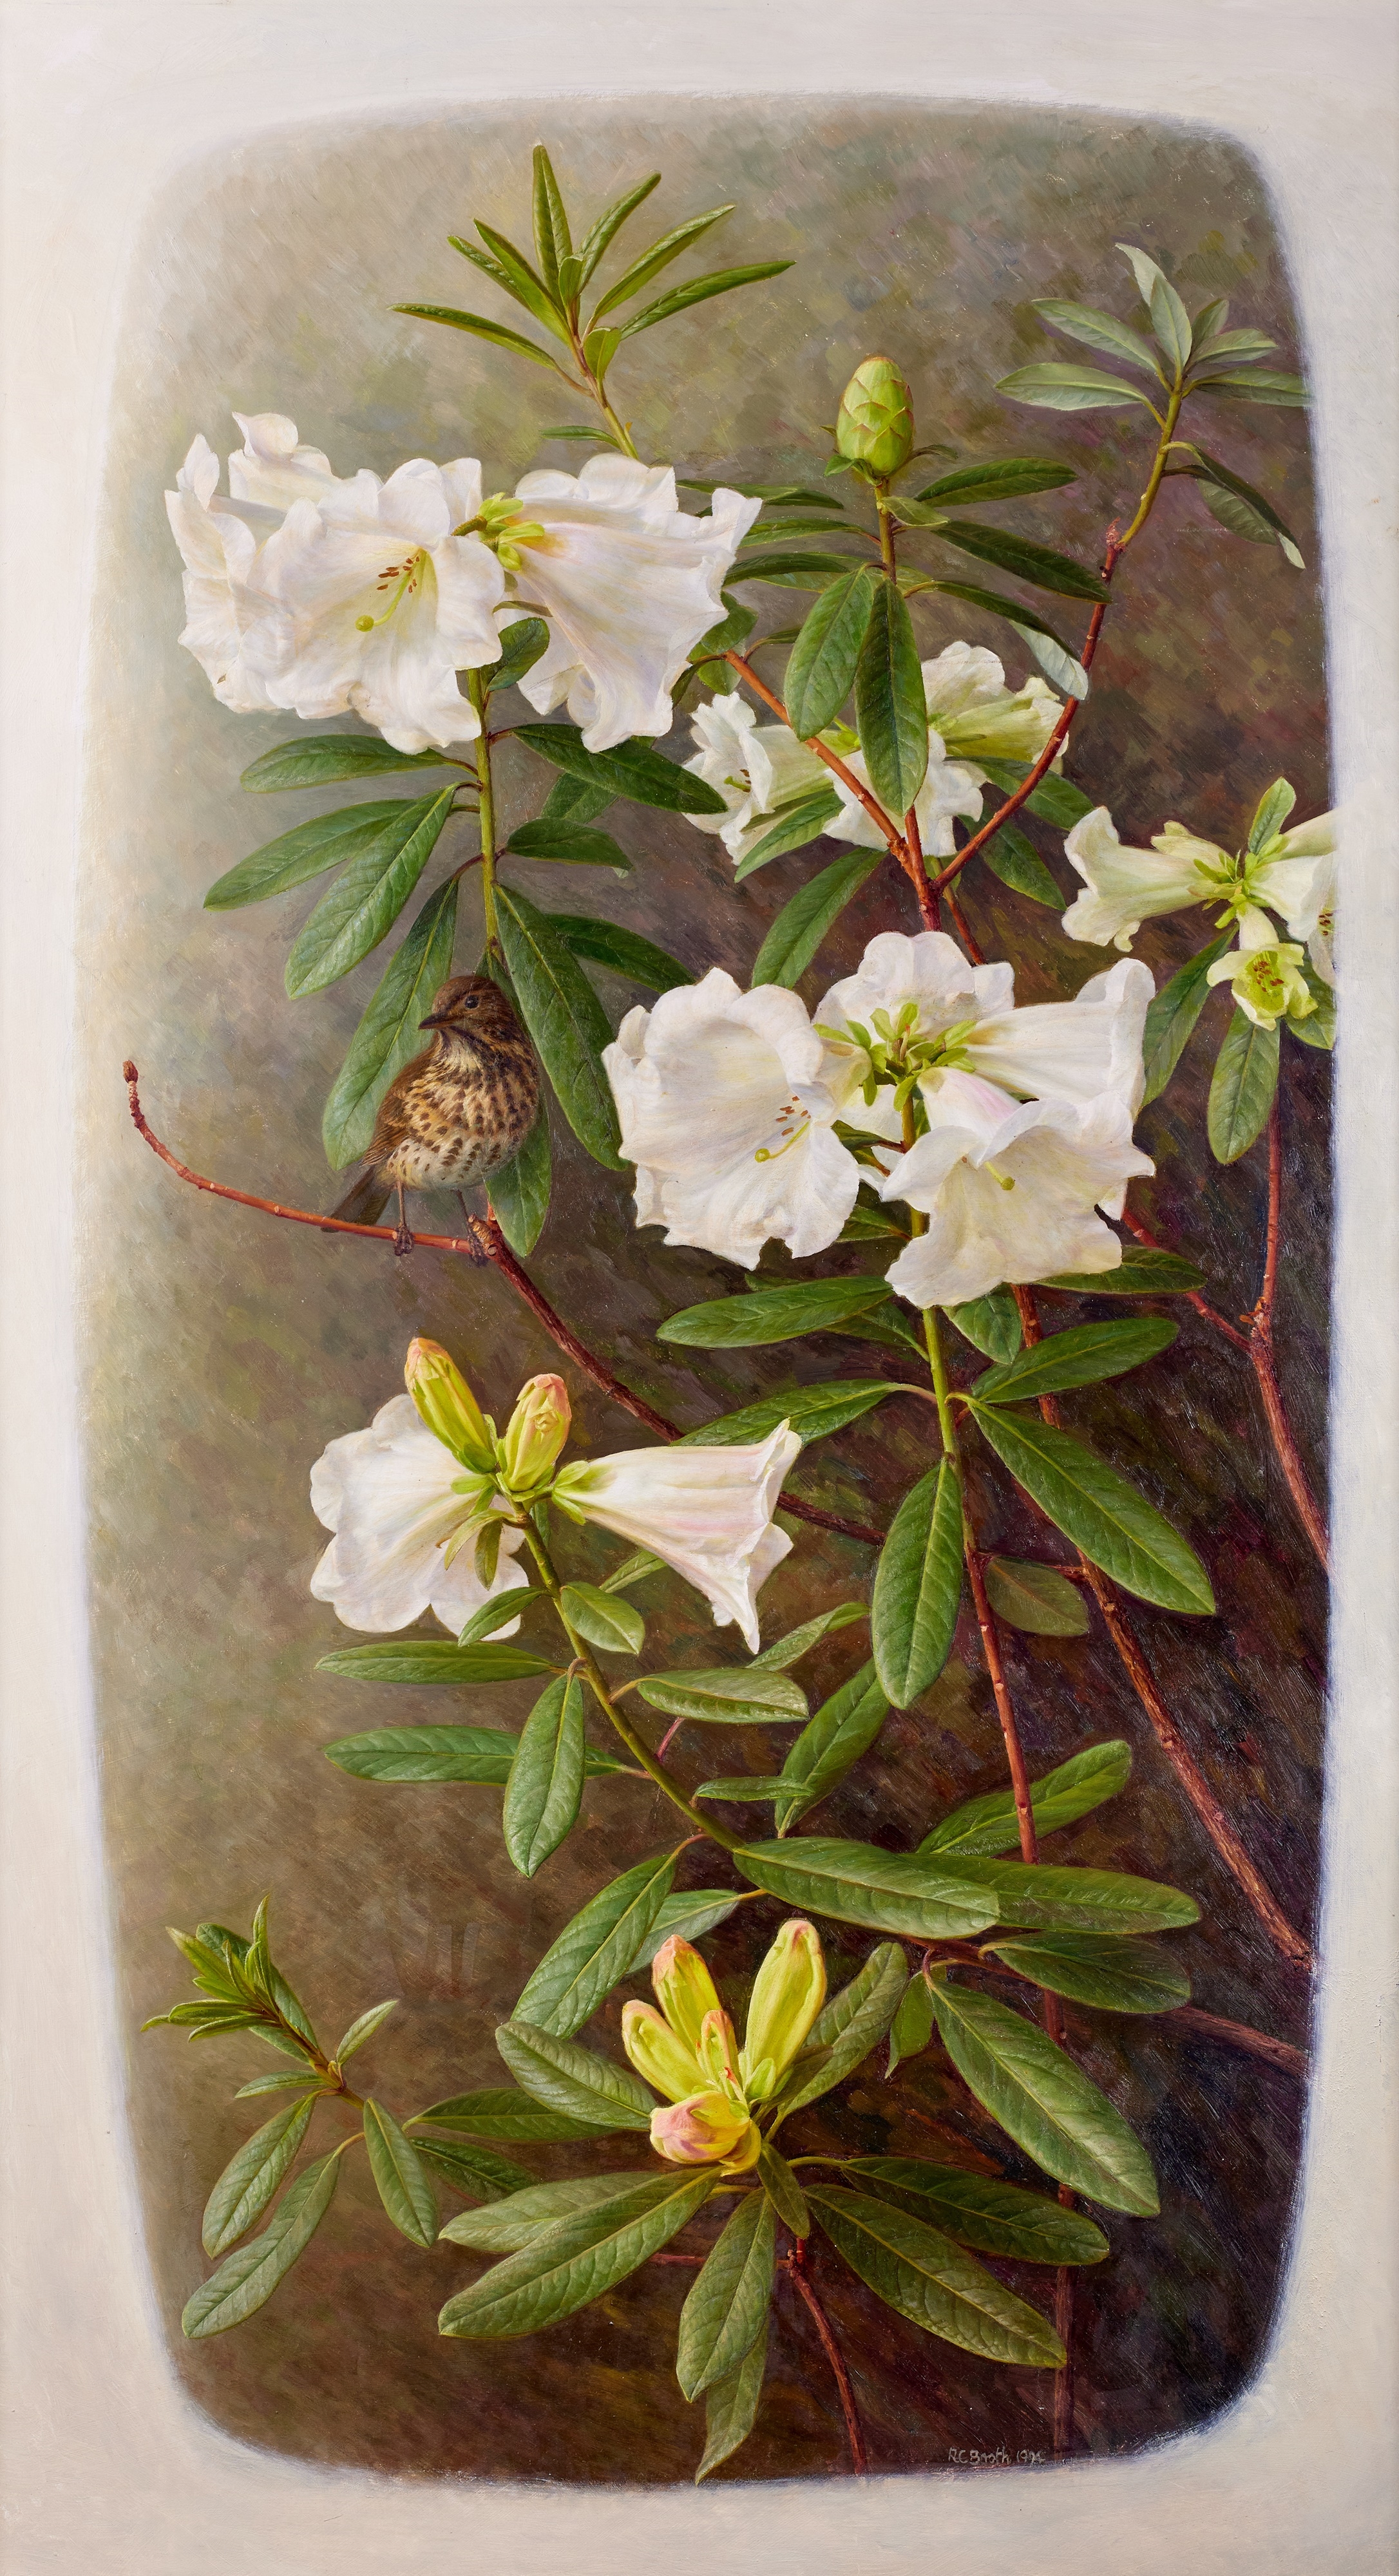 RhododendronLindleyi by Raymond Booth, 1994